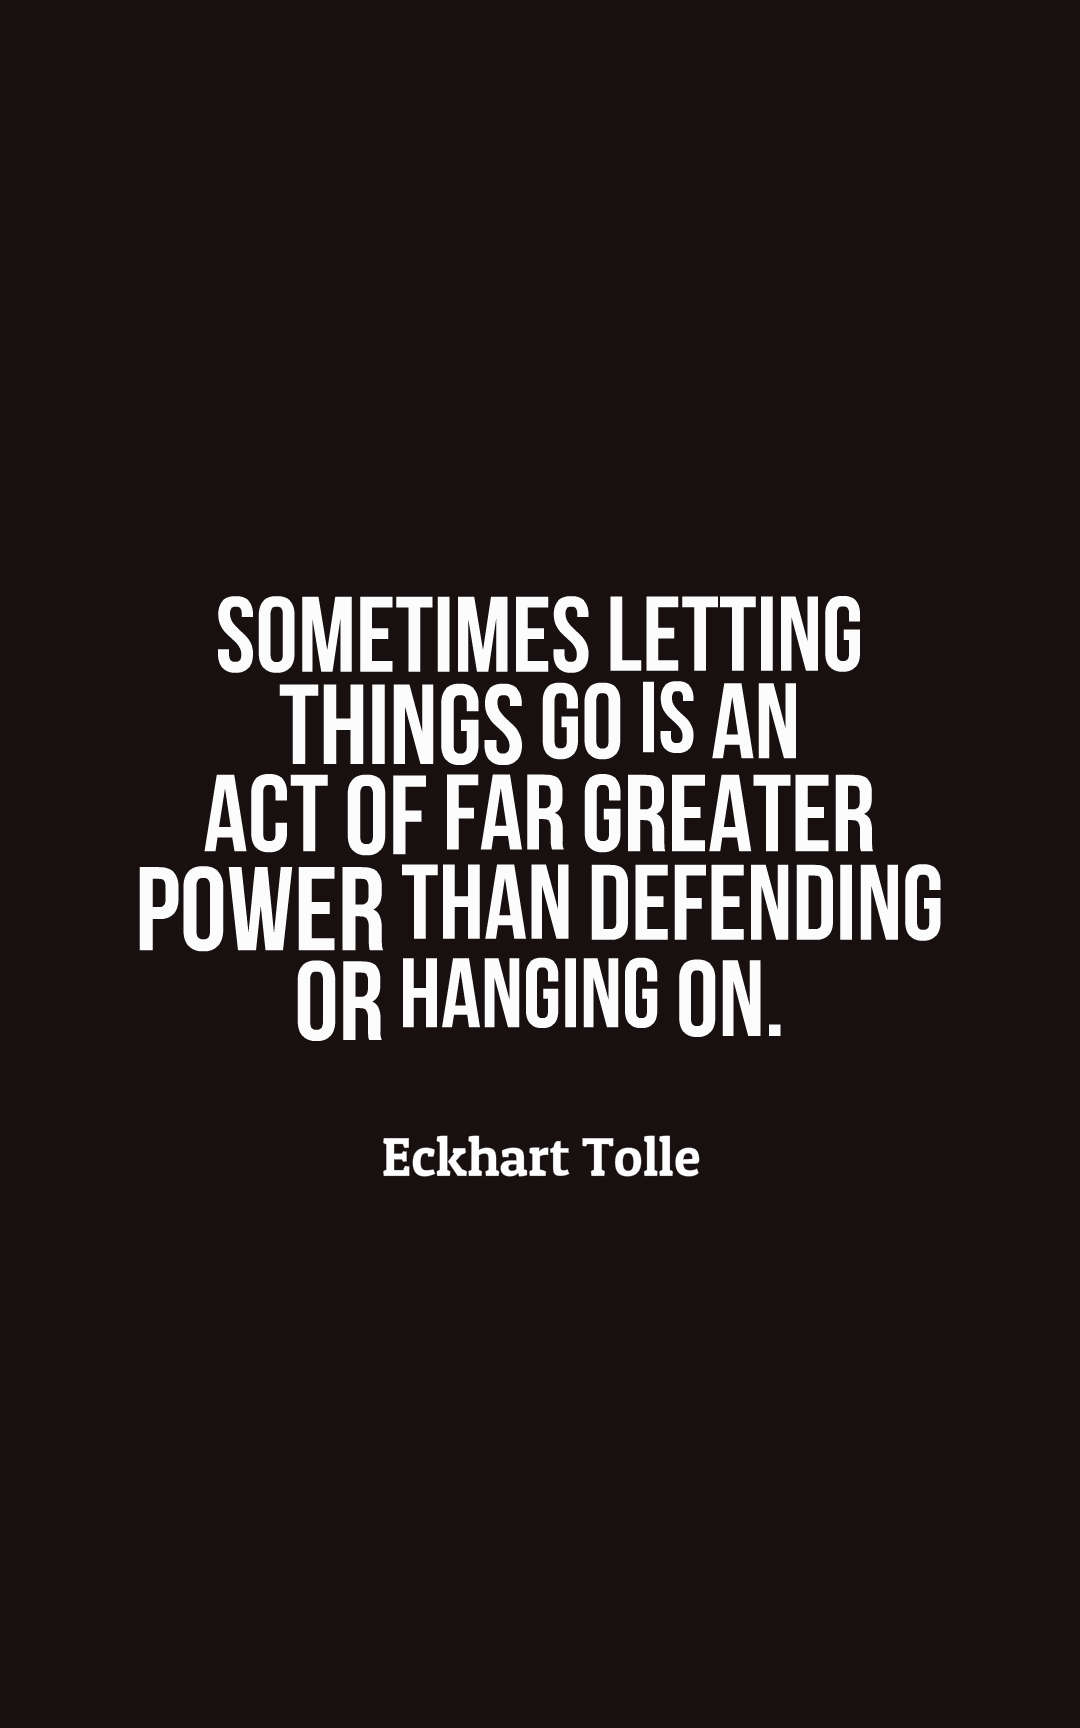 Sometimes letting things go is an act of far greater power than defending or hanging on.